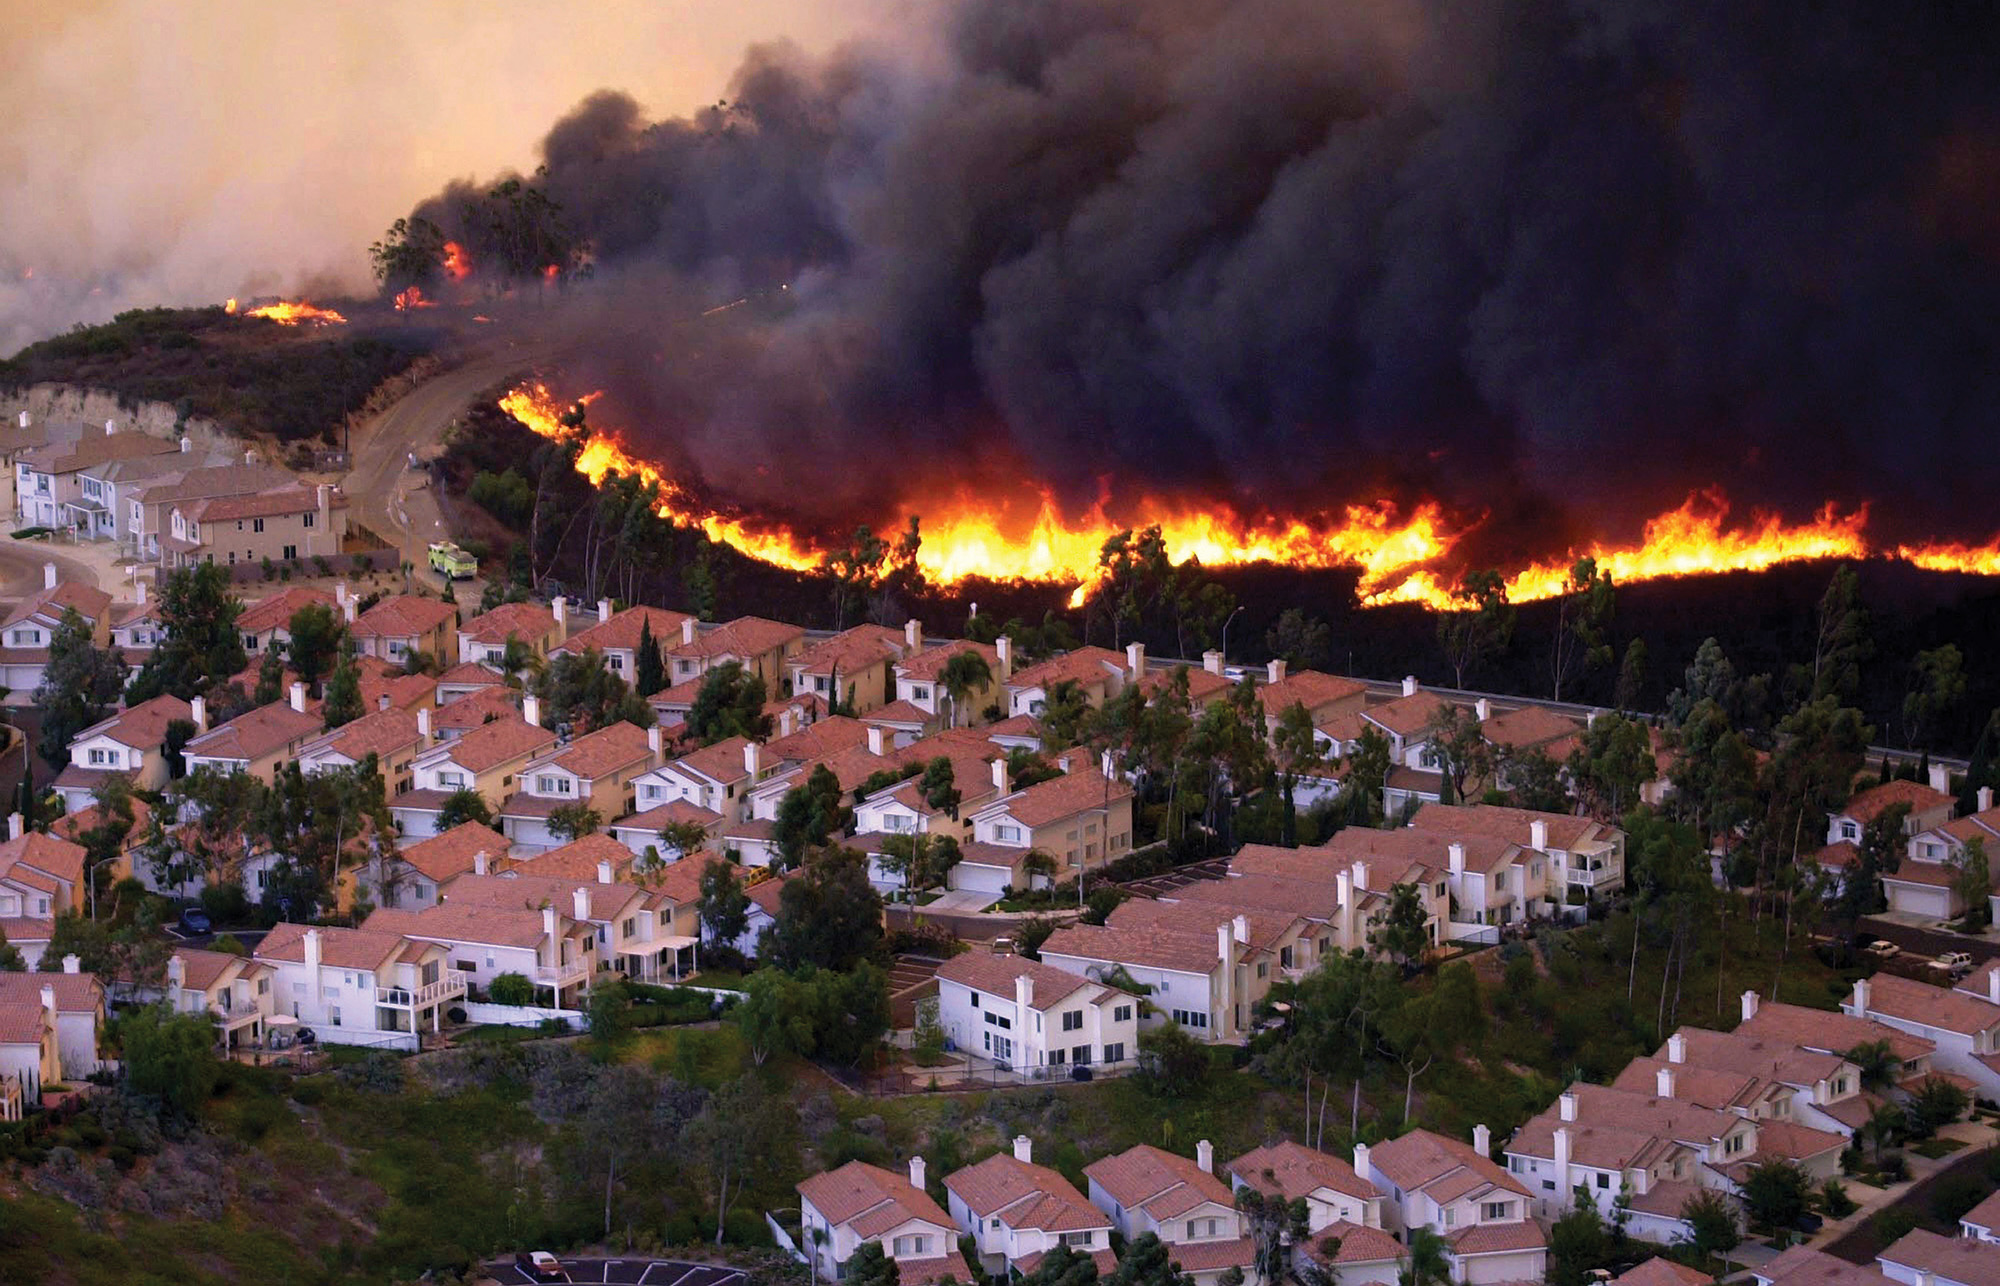 What if a Wildfire Erupted Tomorrow?